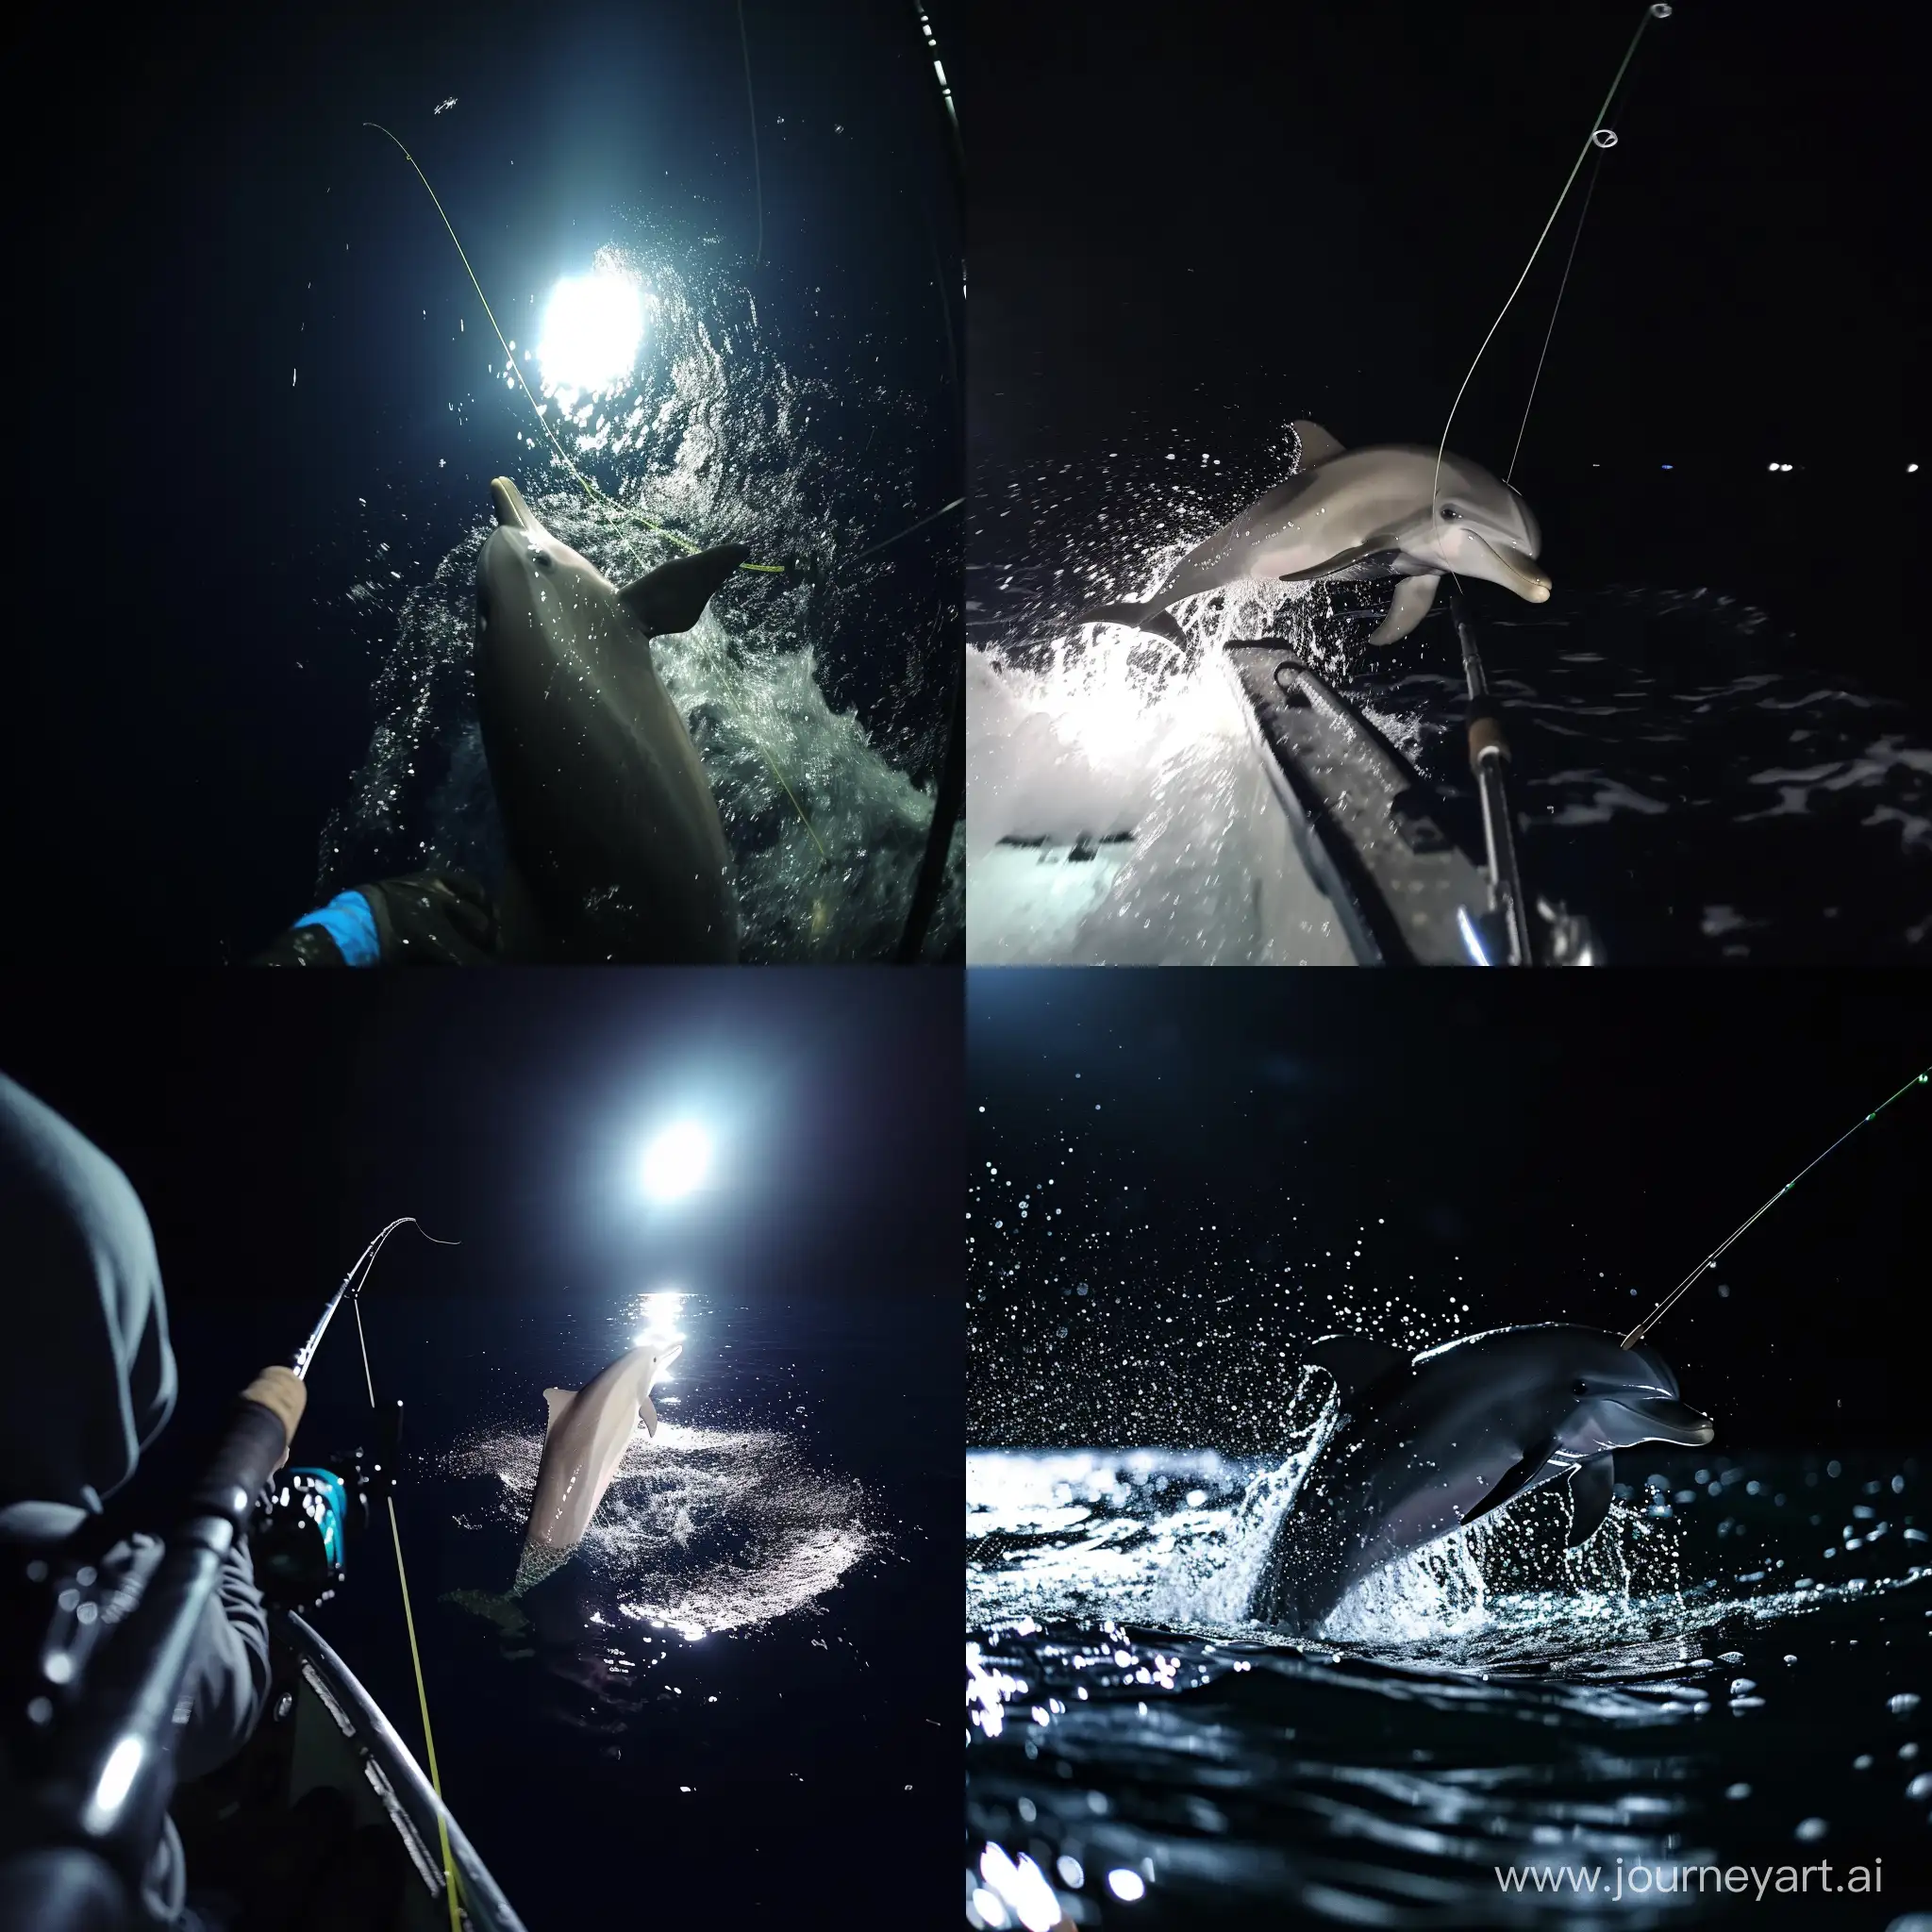 first person perspective while fishing in the ocean at night and reeling in a dolphin